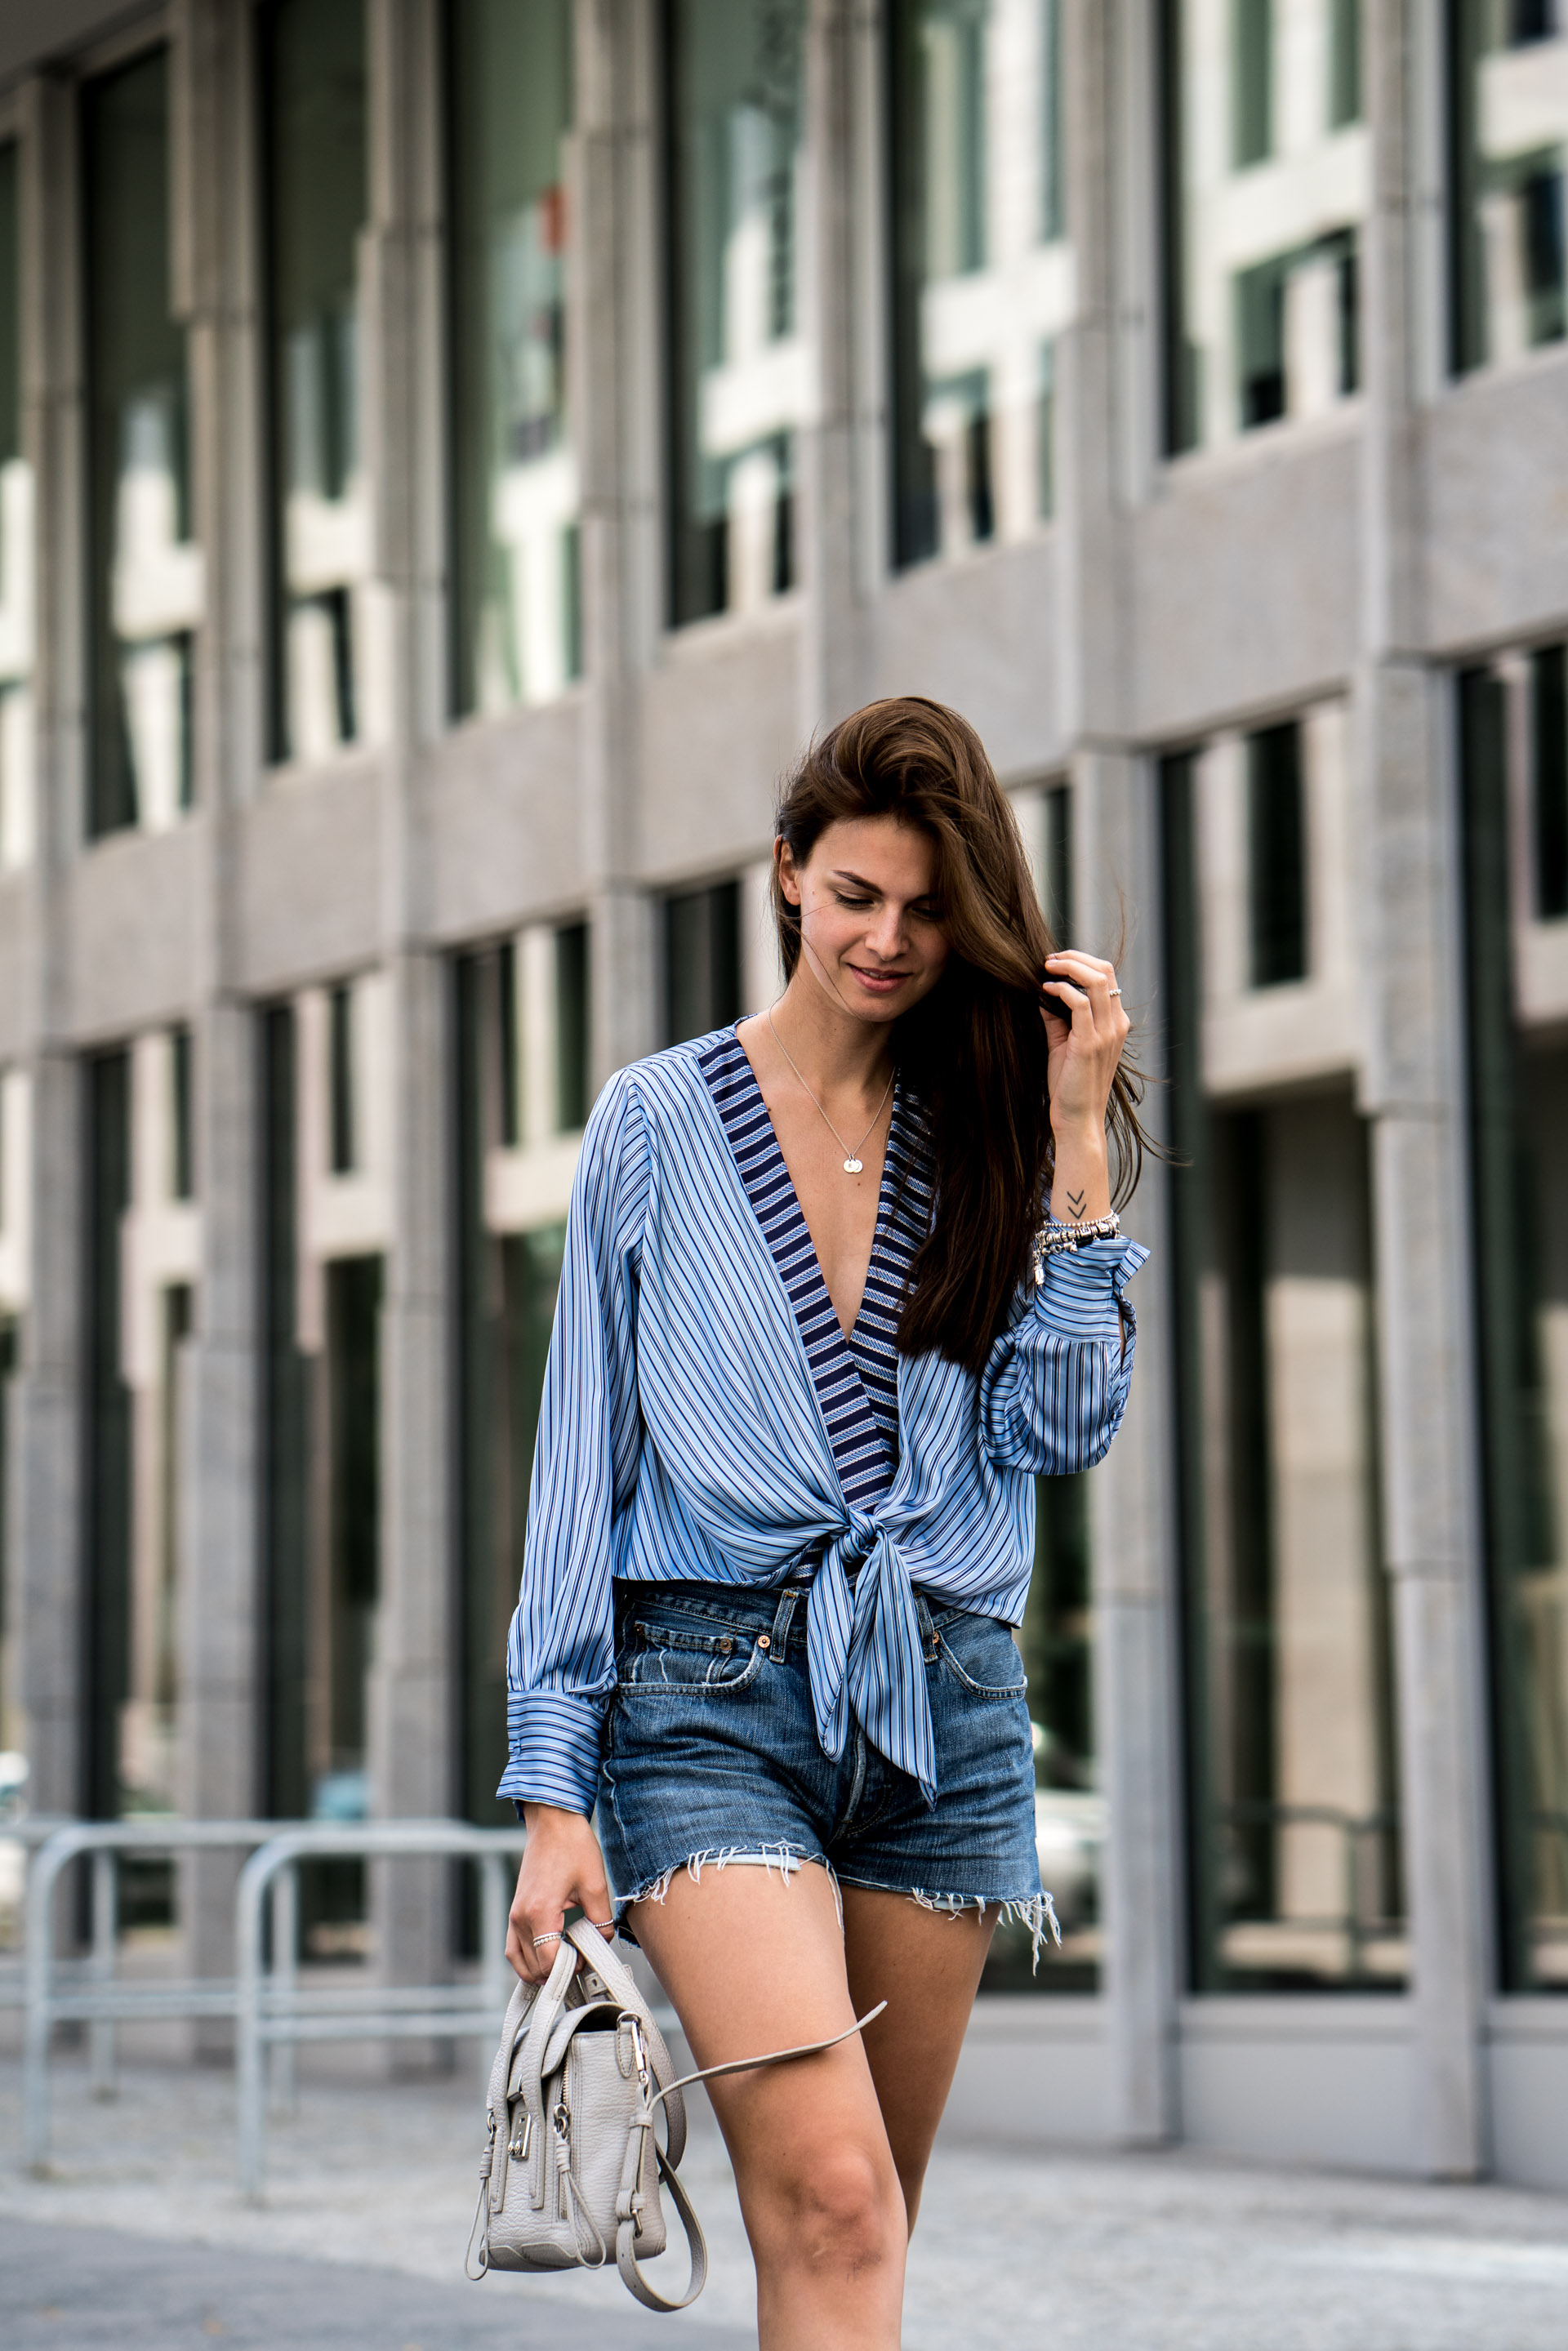 How to wear a low neckline body || Fashionblog Berlin || Summer Outfit